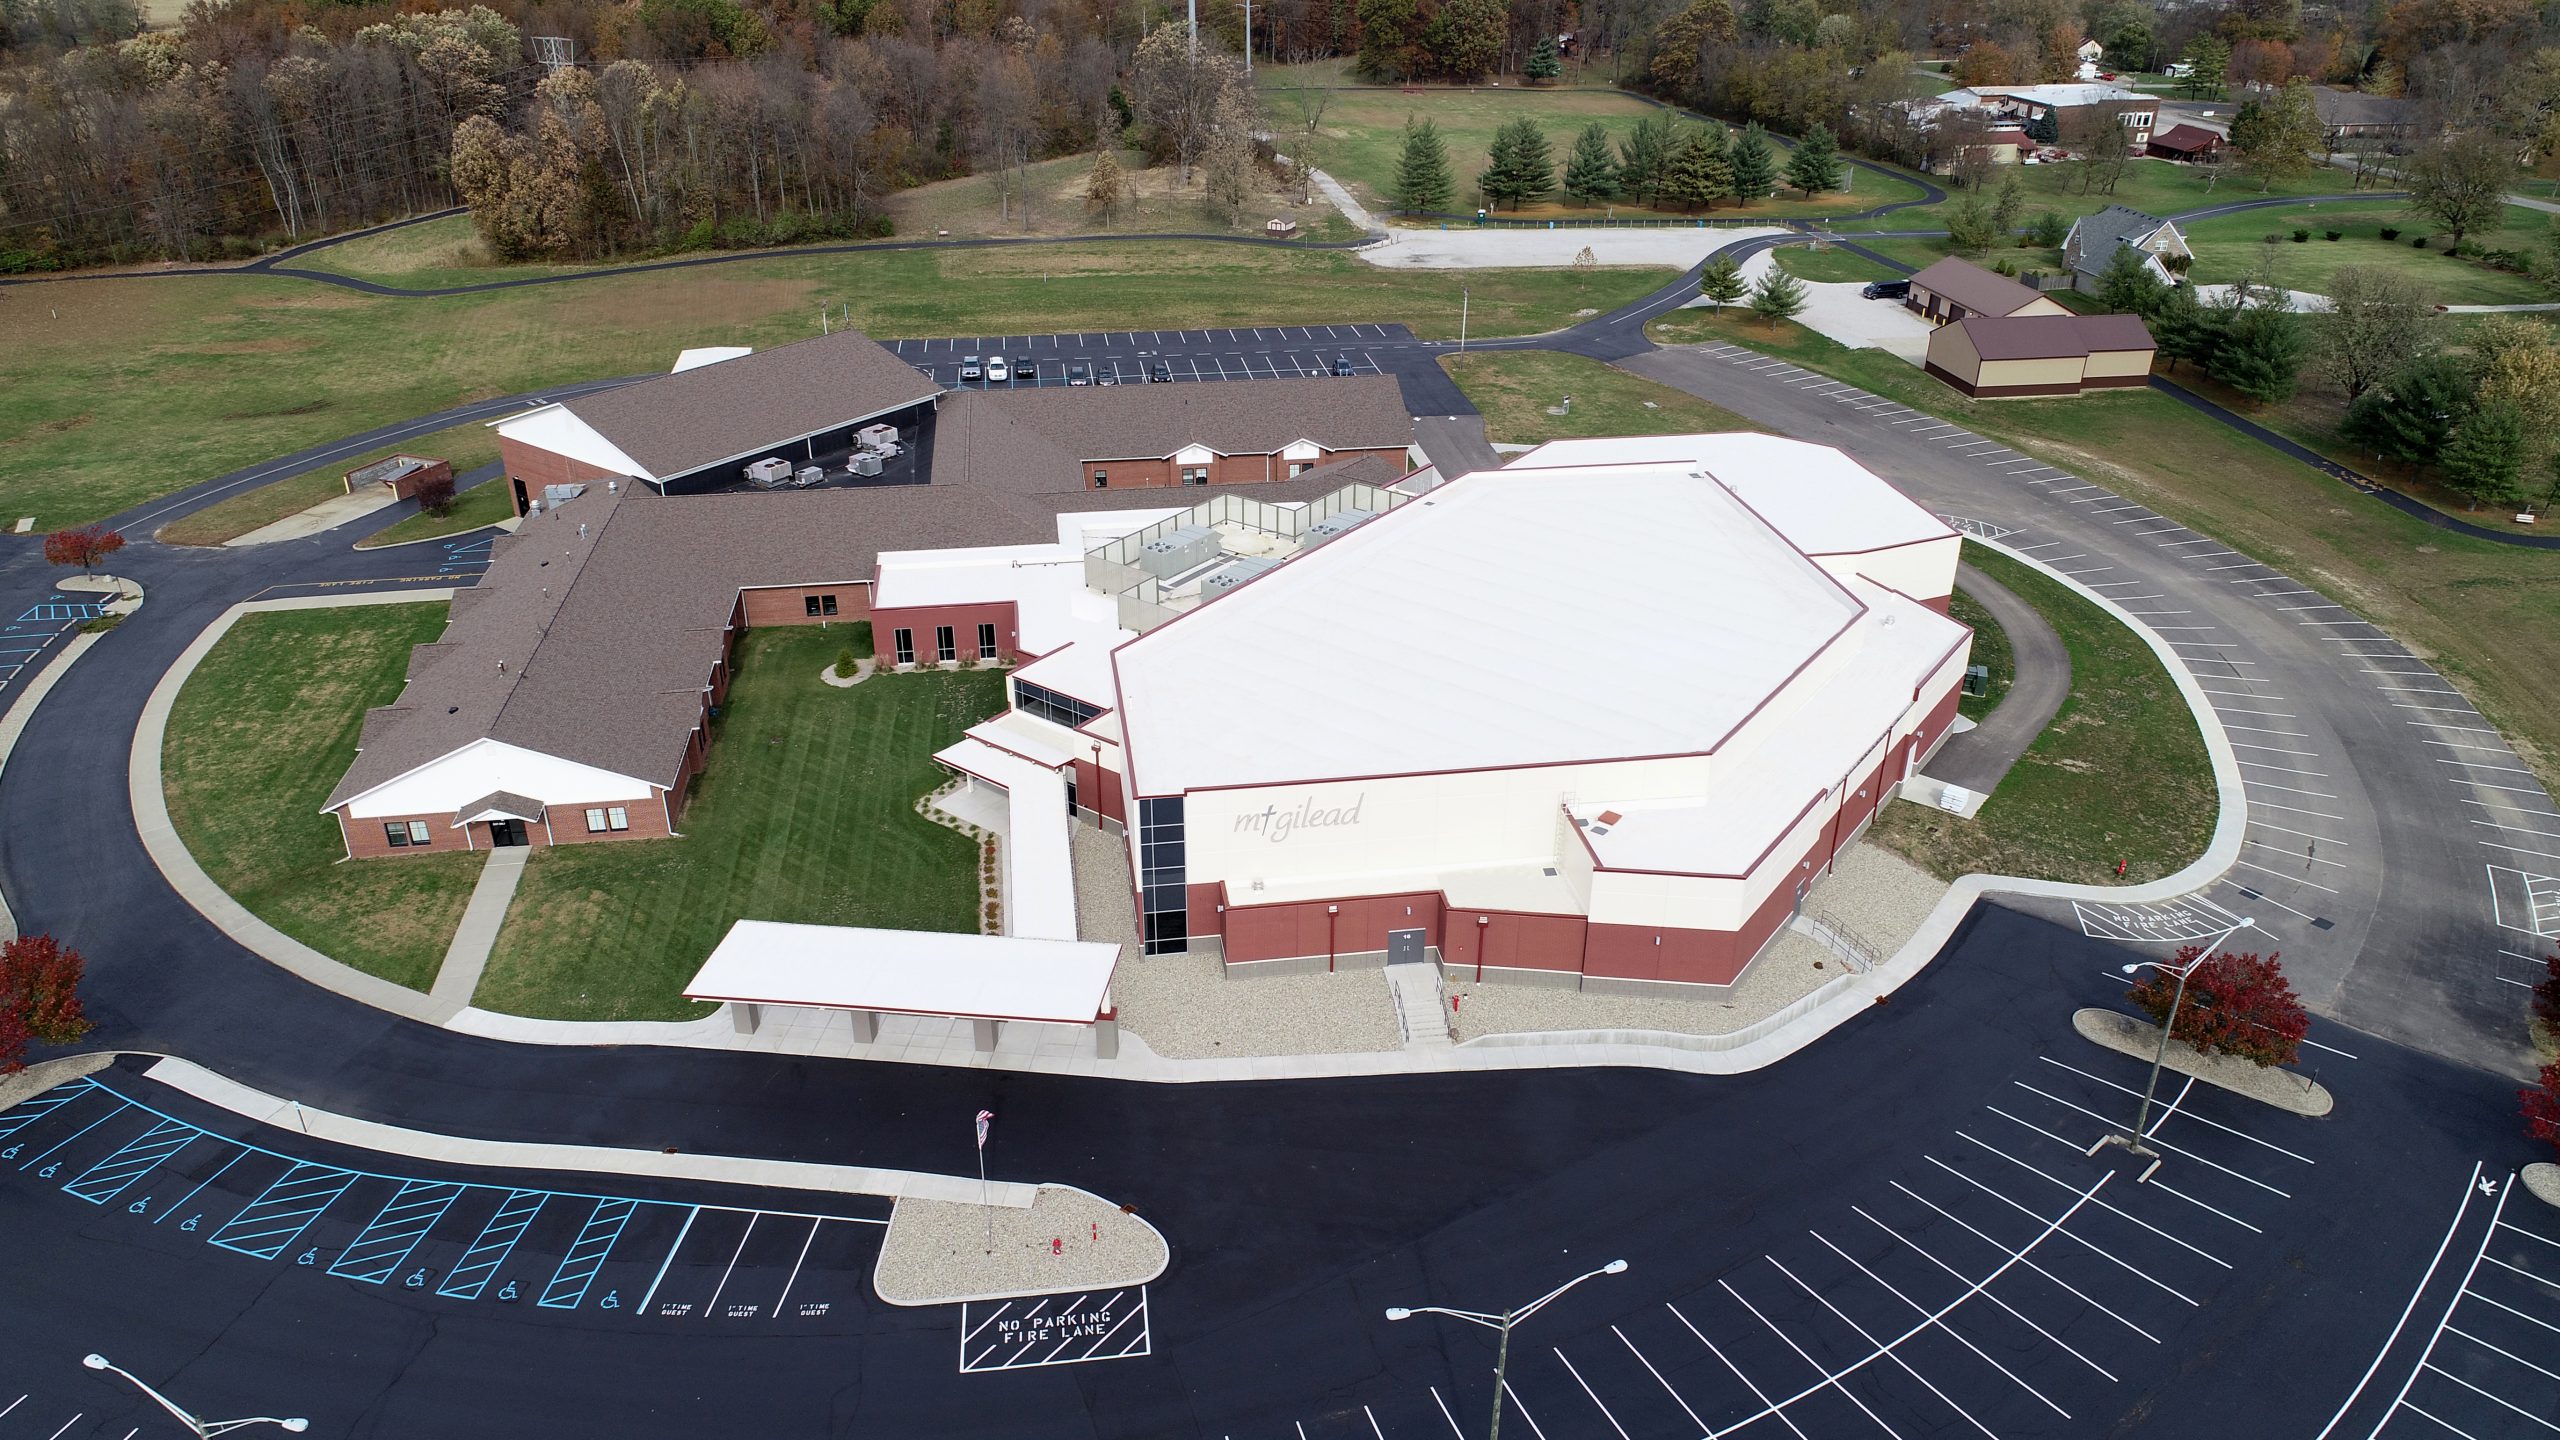 Mt Gilead Church commercial roofing project by ce reeve roofing in Indiana